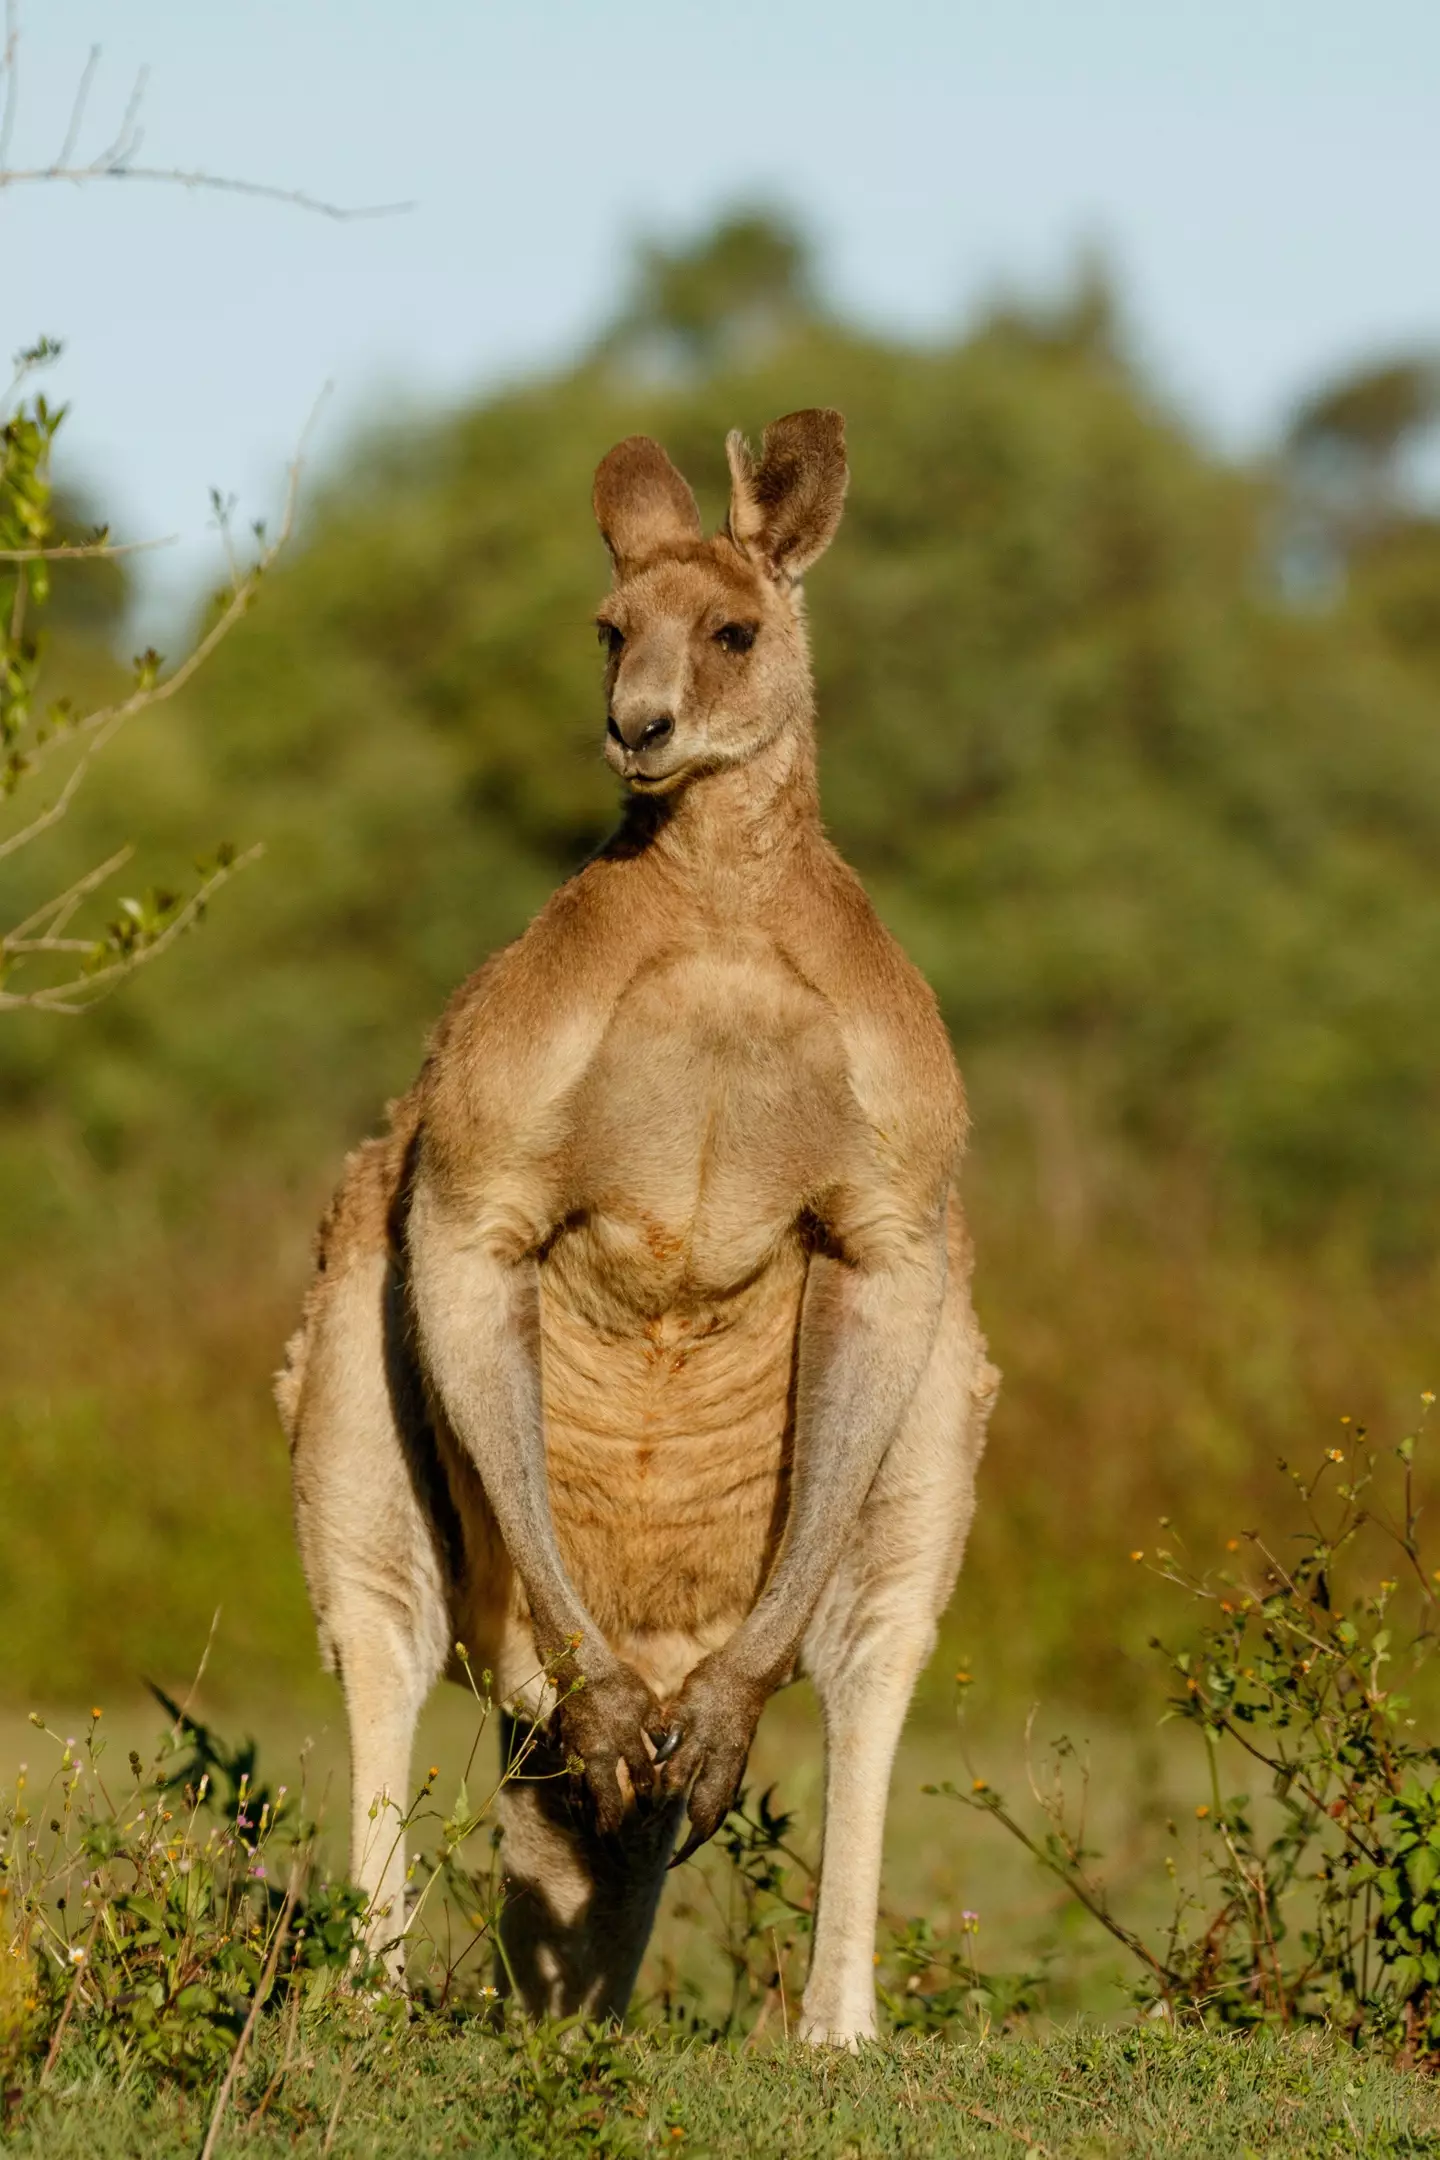 Human's 'upright stance [...] is a challenge to the male kangaroo'.